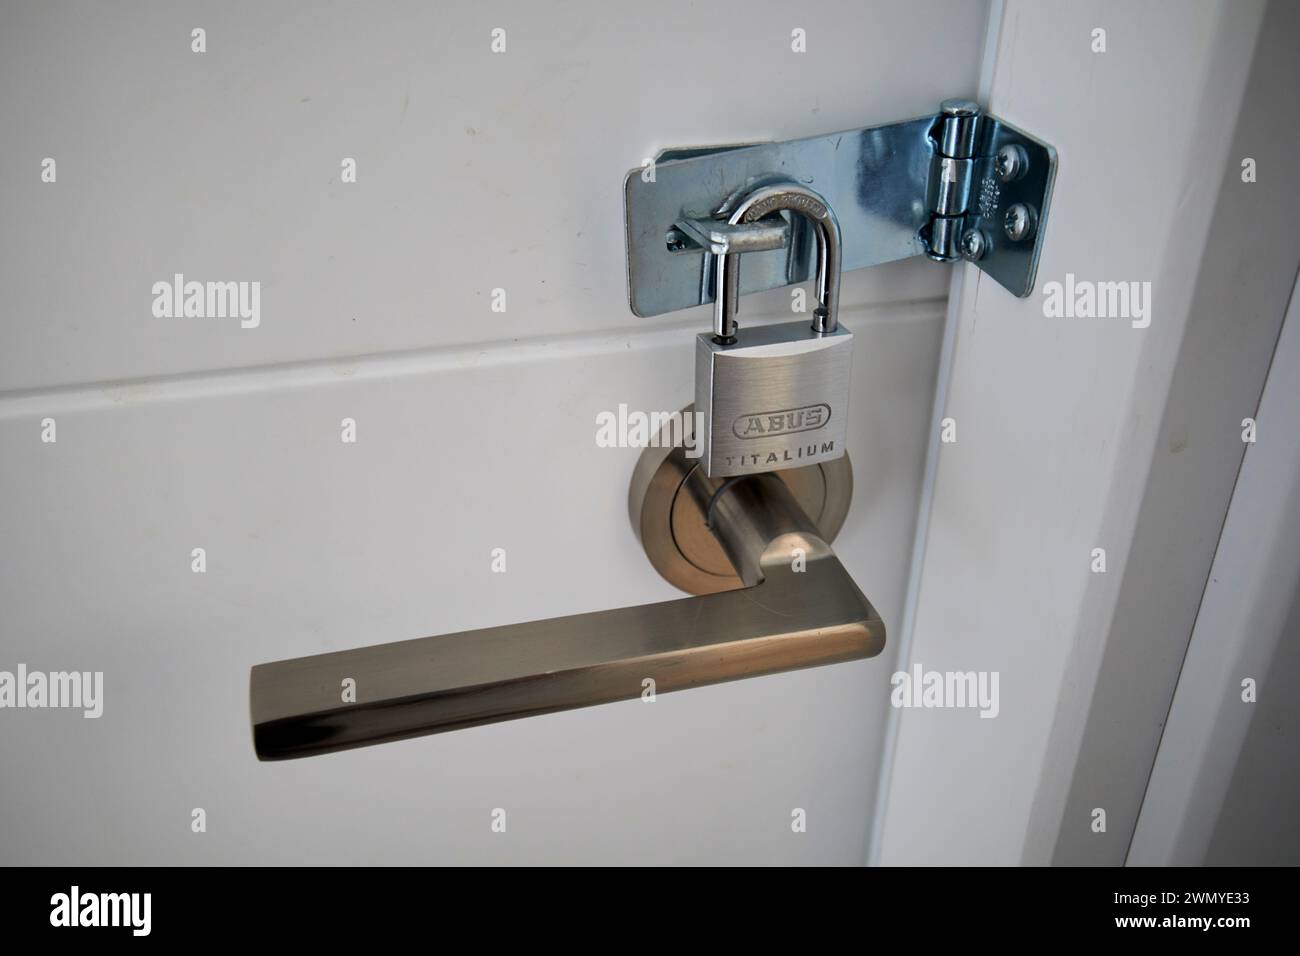 padlock on a hasp and staple on a door locking it from the outside spain Stock Photo